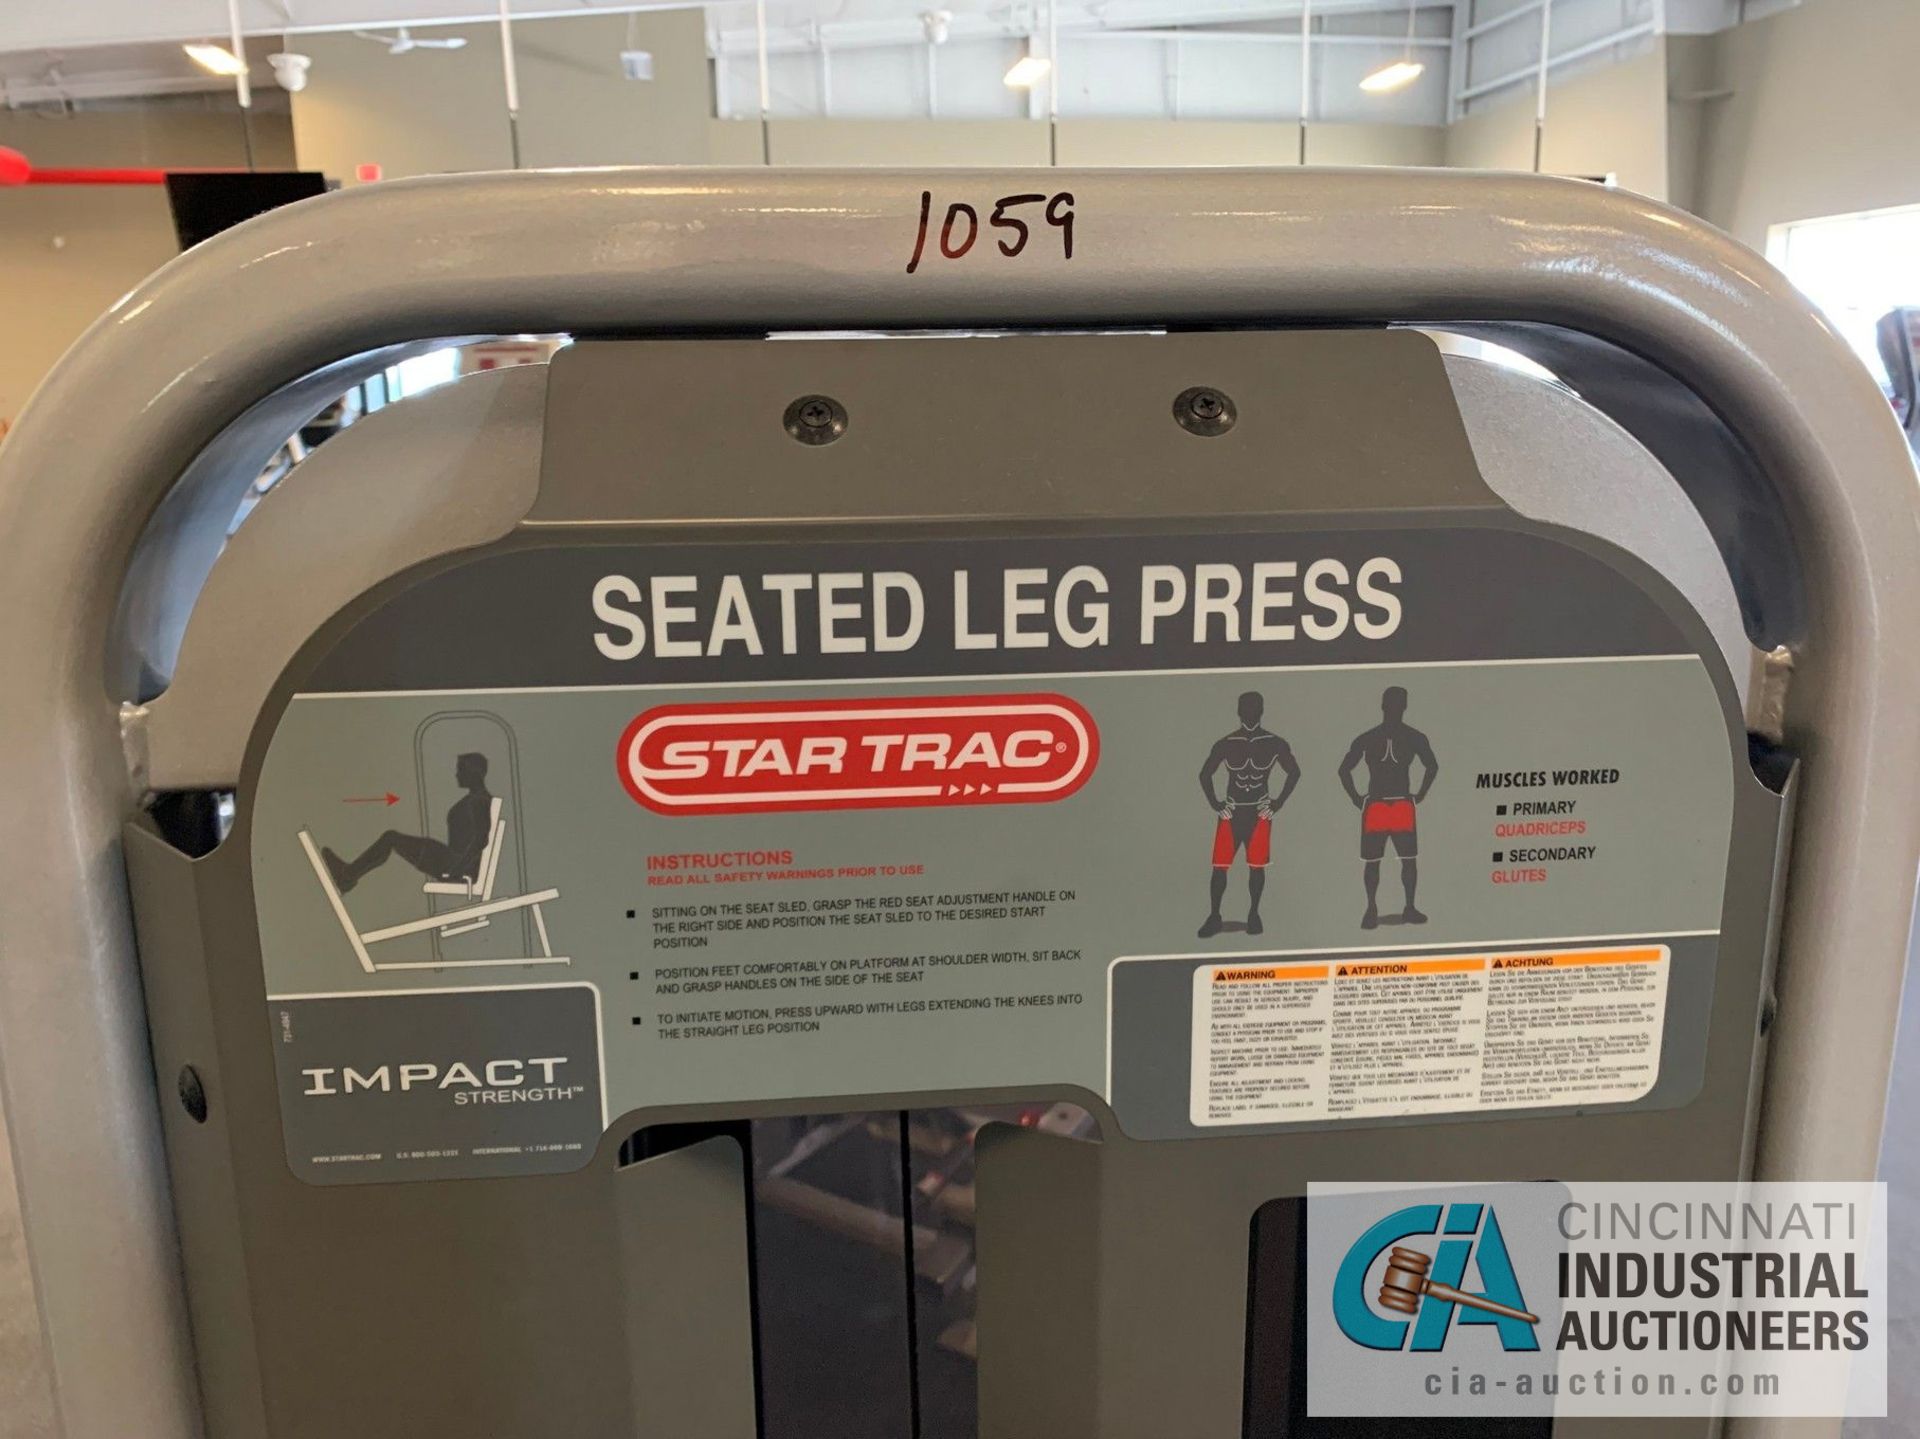 STAR TRAC IMPACT STRENGTH SEATED LEG PRESS SELECTORIZED STRENGTH TRAING MACHINE - Image 5 of 6